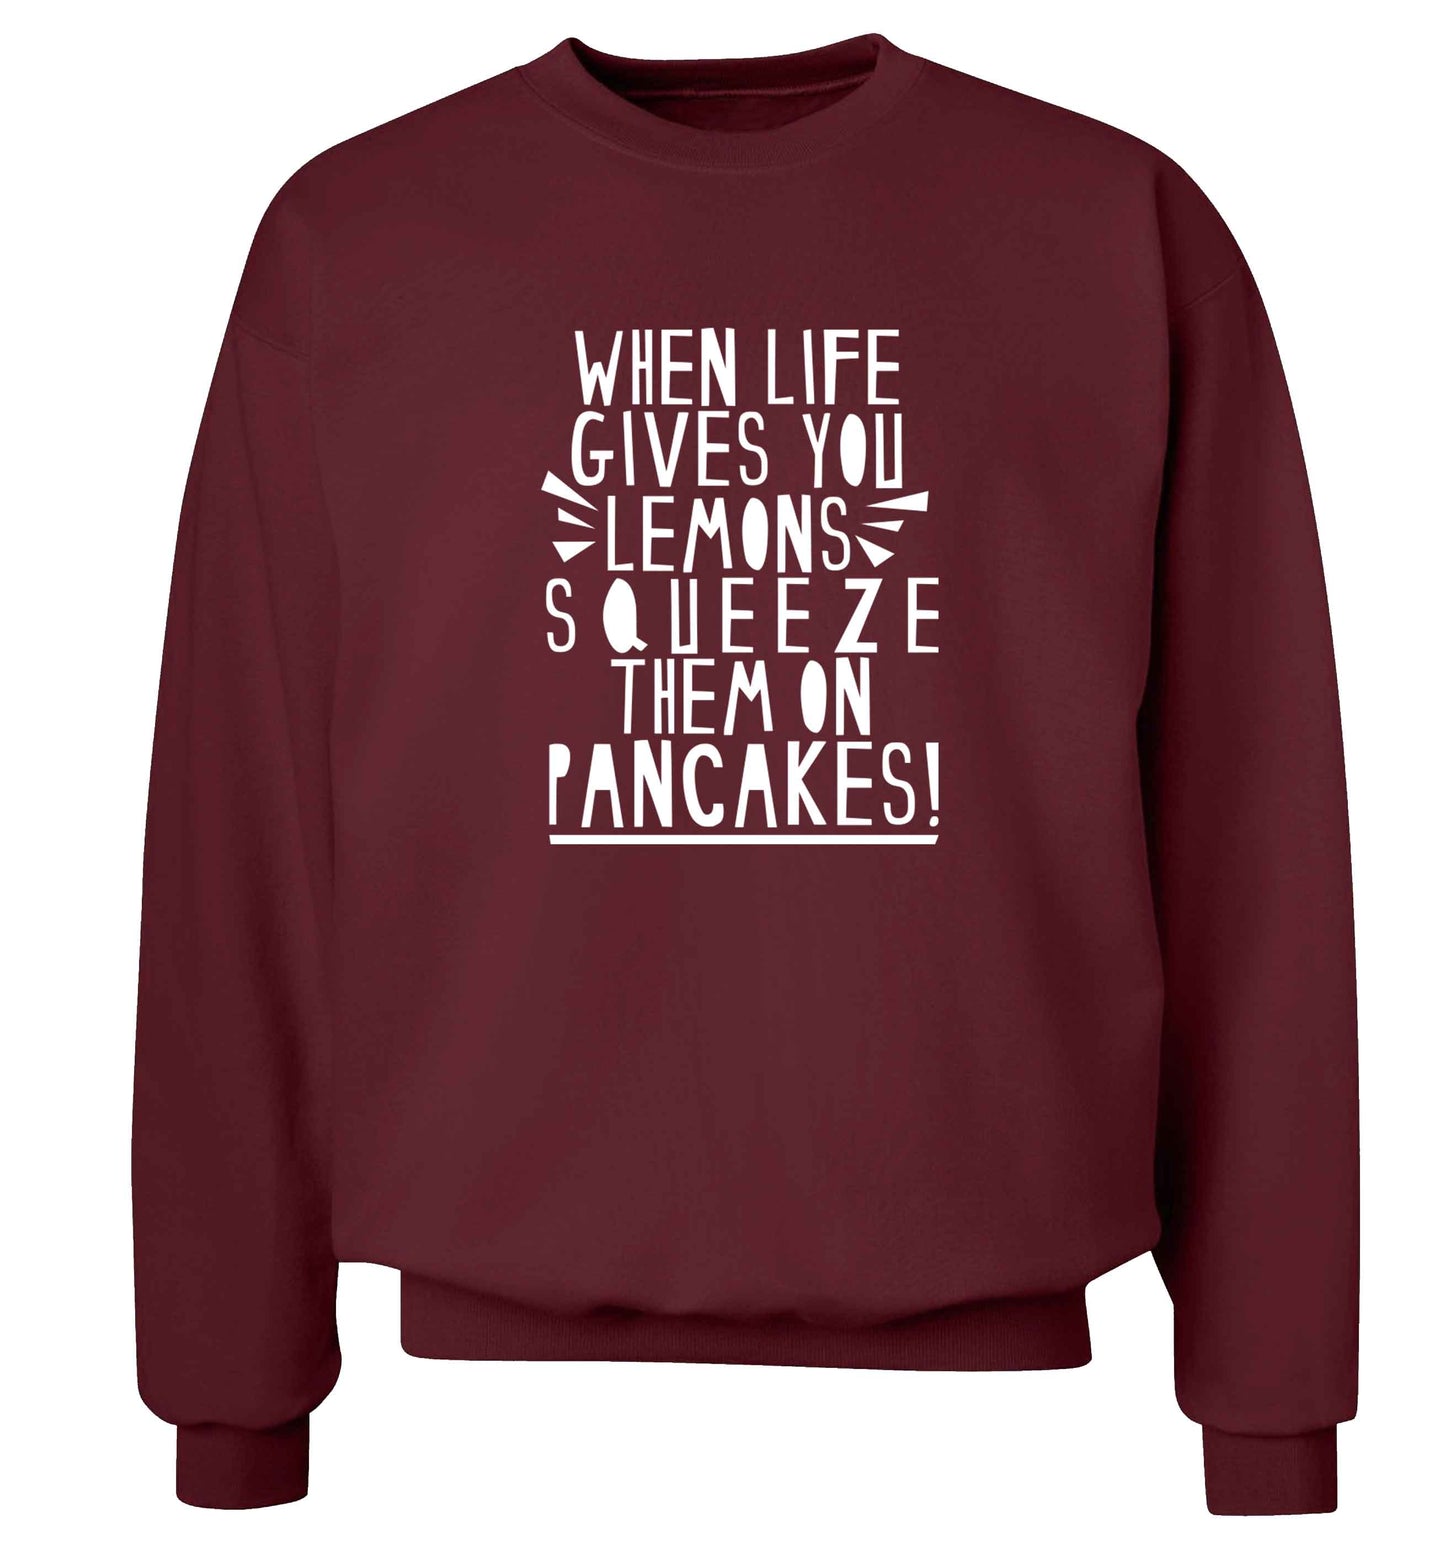 When life gives you lemons squeeze them on pancakes! adult's unisex maroon sweater 2XL